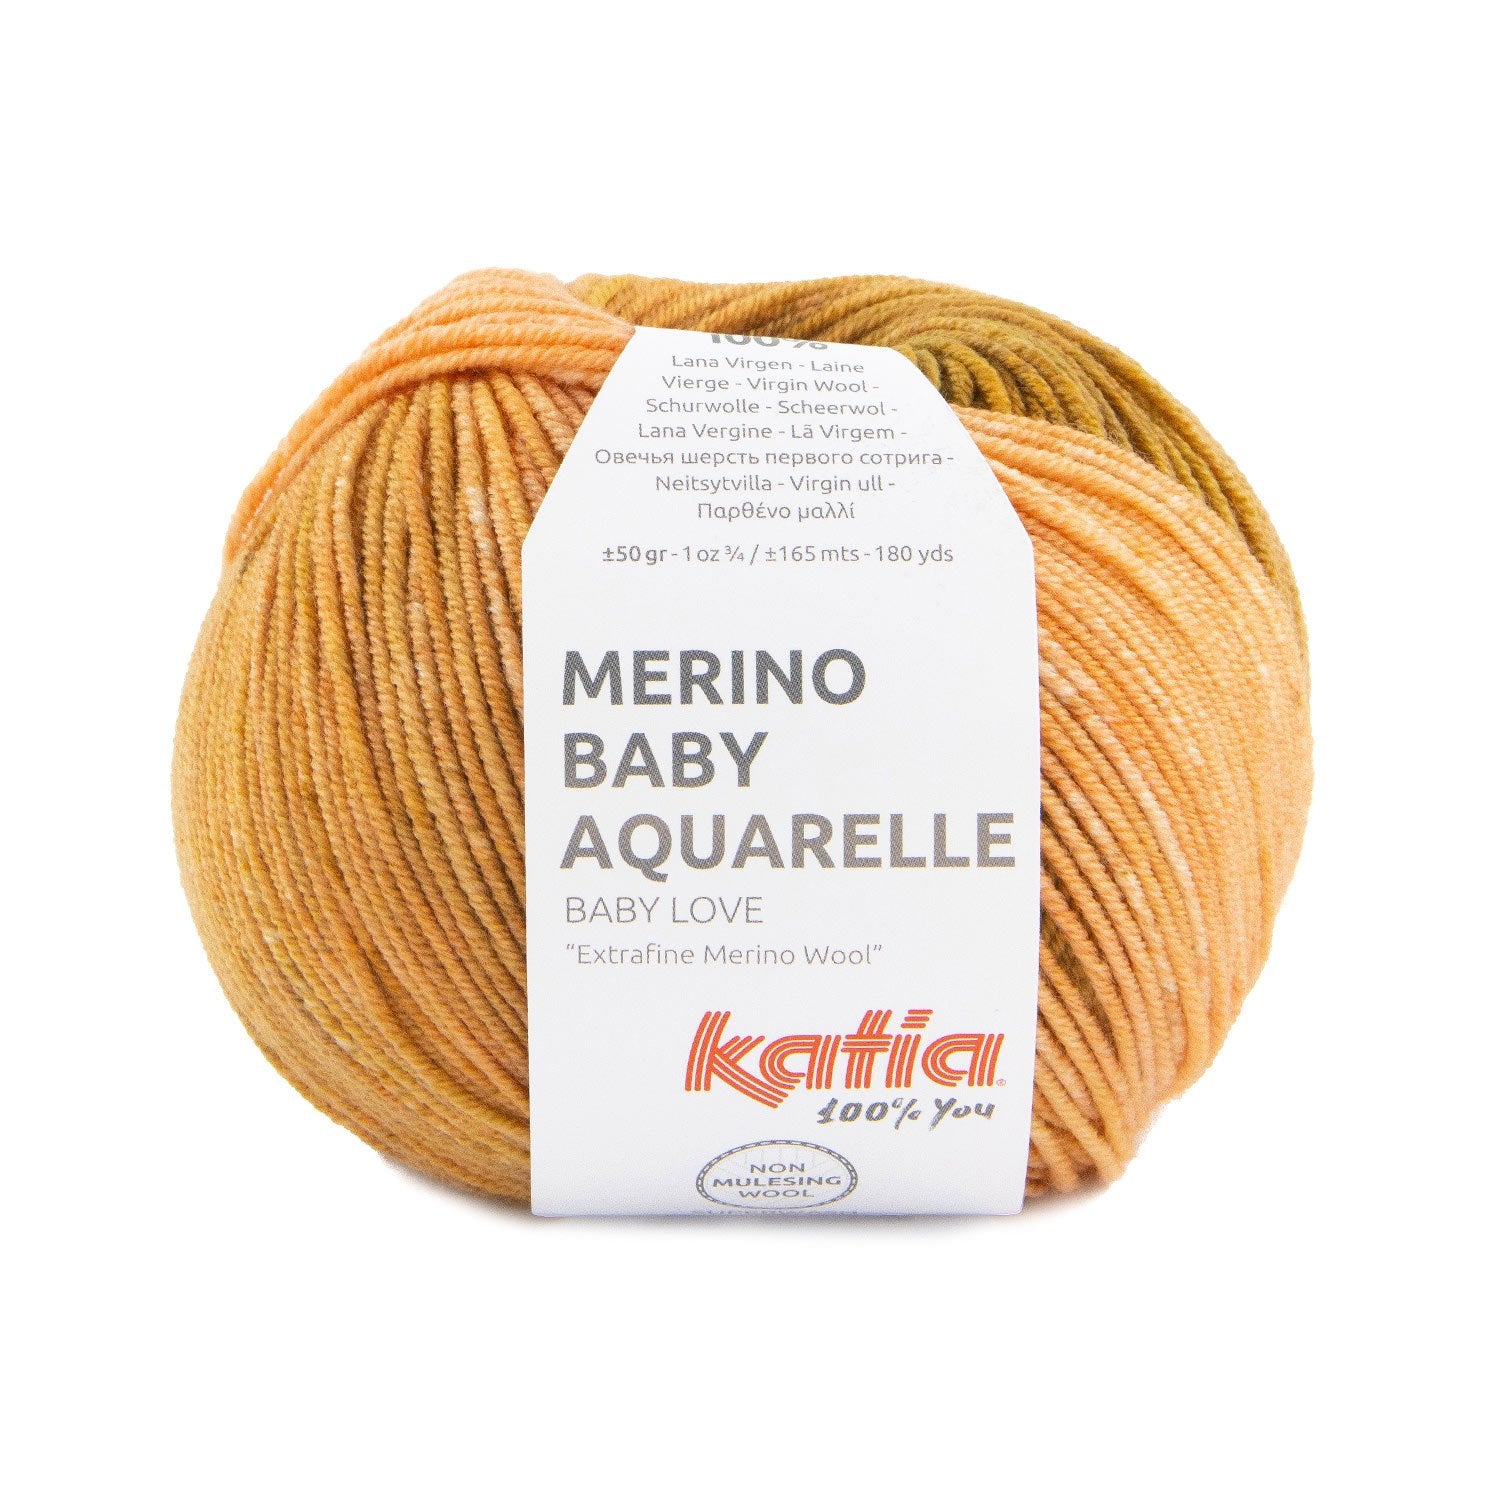 Merino Baby Aquarelle degradé wool in 3 colors for babies by Katia - Soft and durable